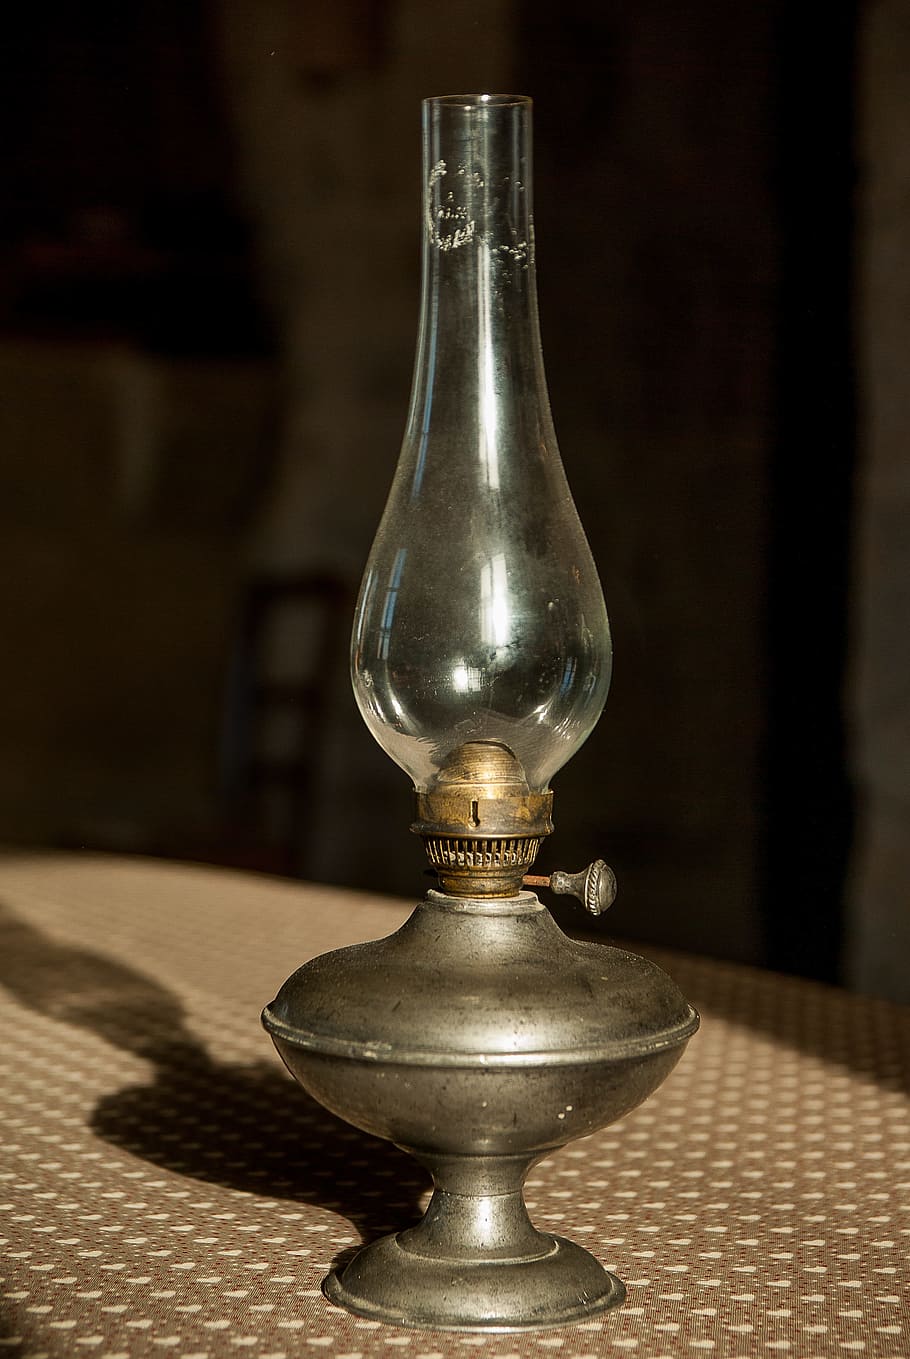 grey, oil lamp, table, lighting, lamp, former, flea market, glass - material, container, focus on foreground